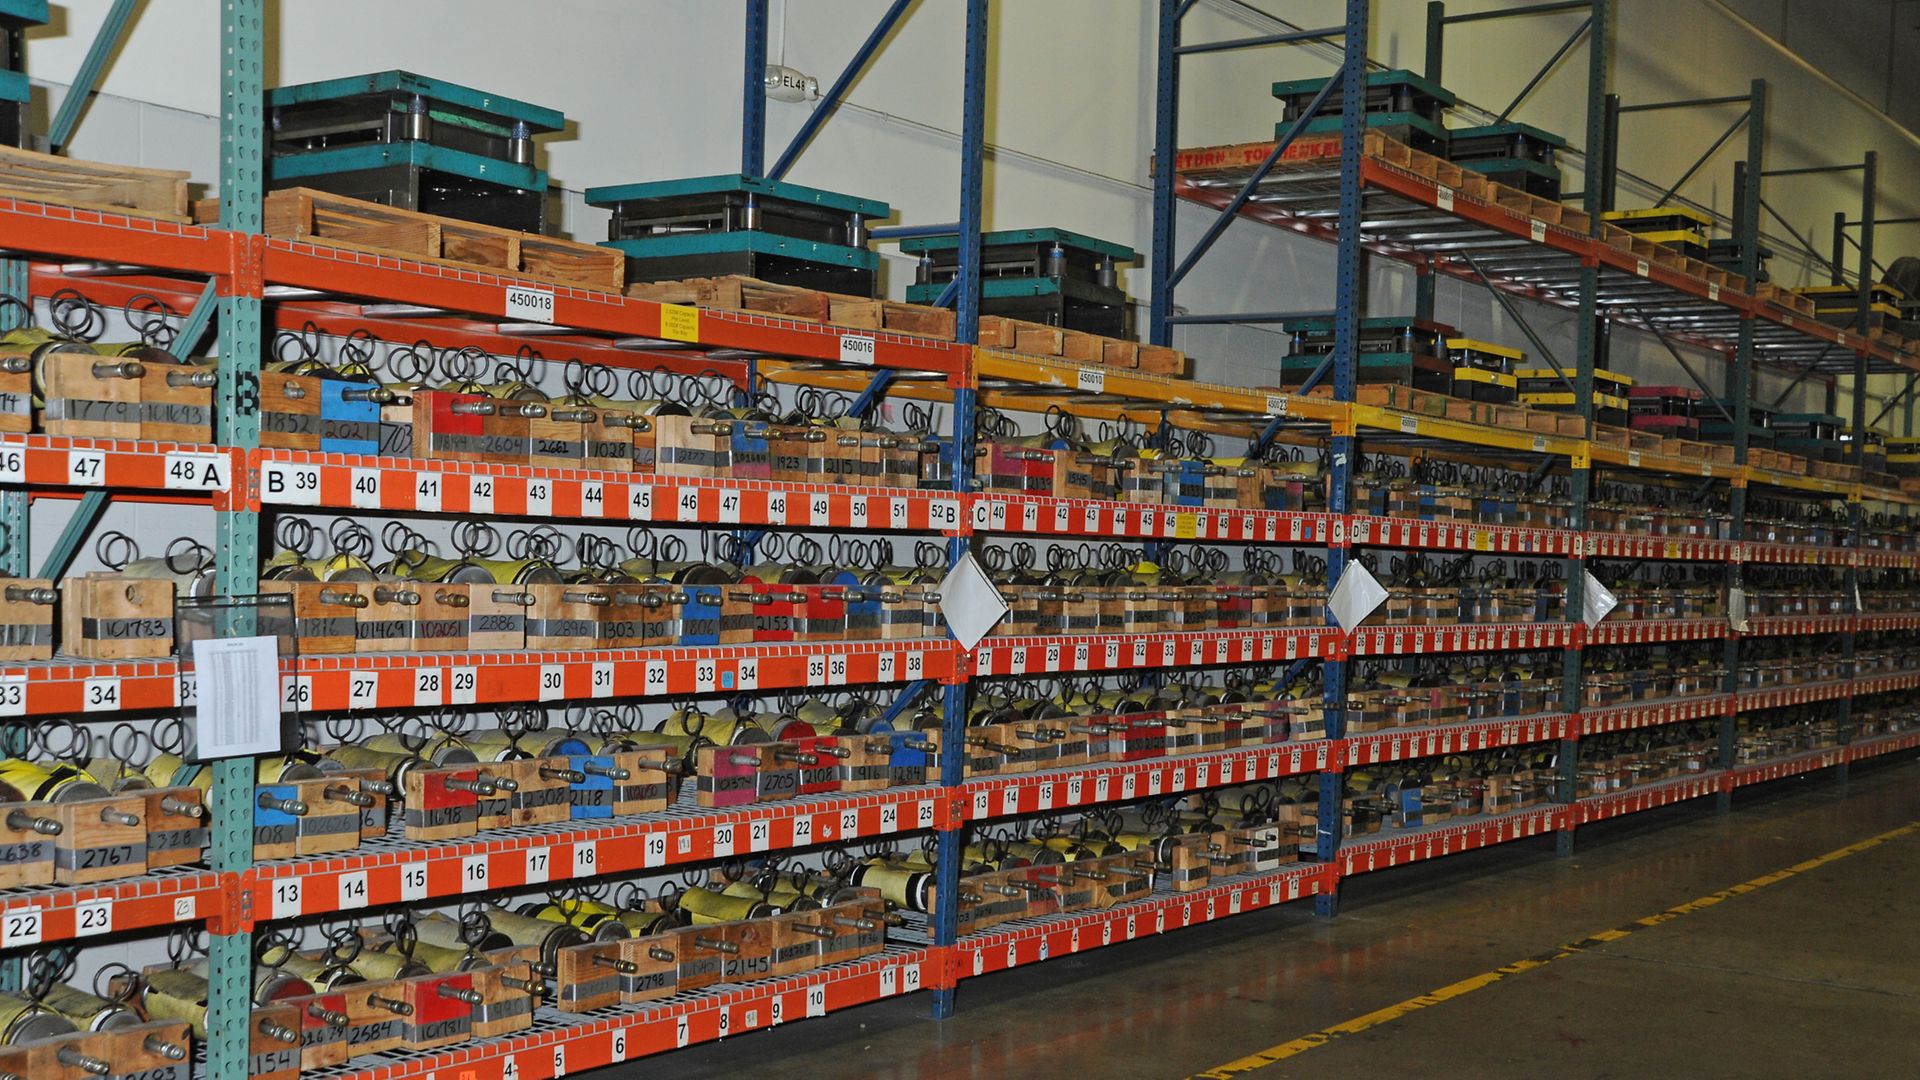 Inventory of more than one million parts neatly organized and readied for shipment at the Richmond facility.